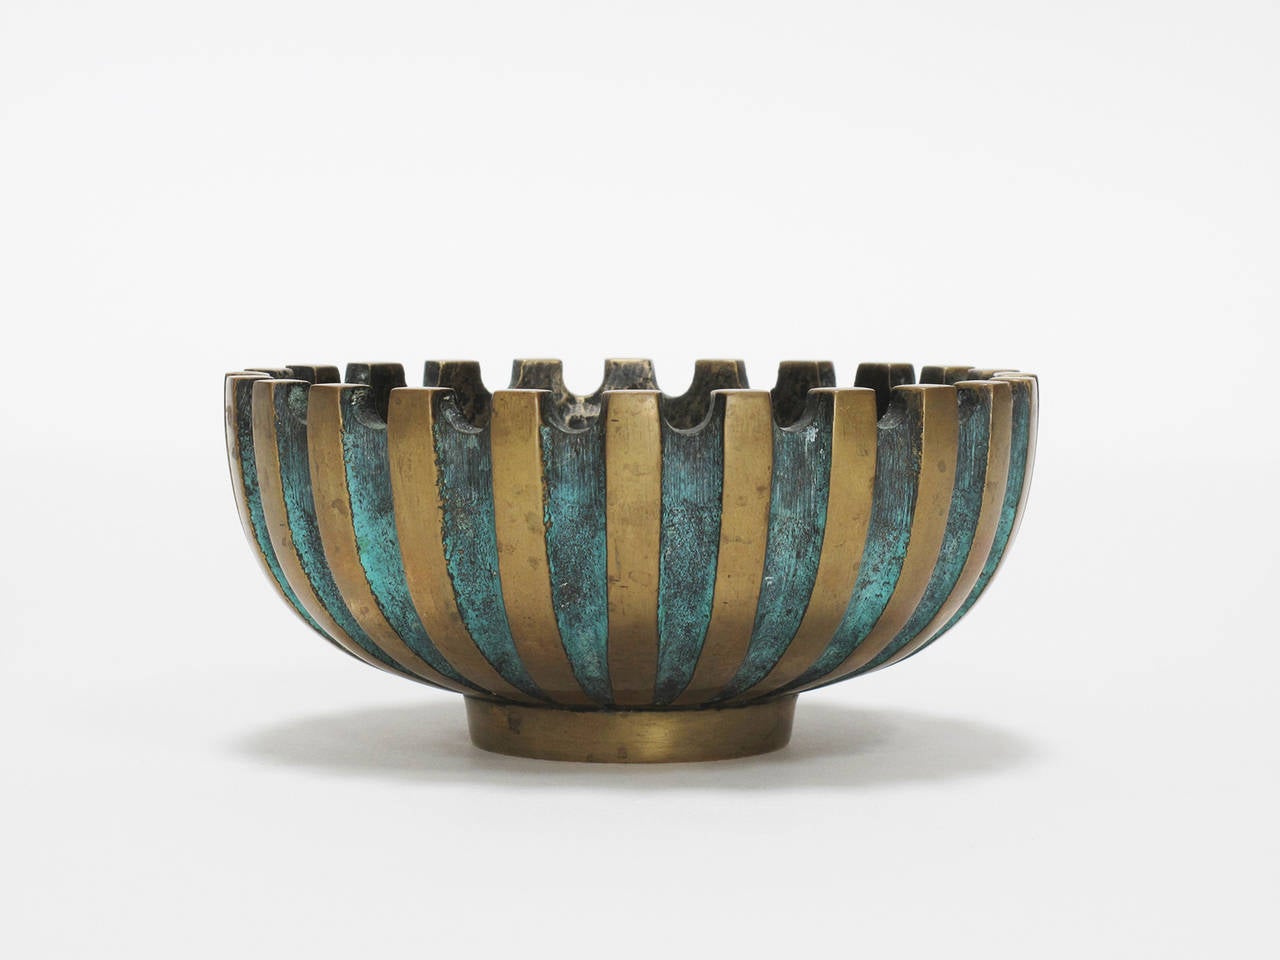 Solid bronze object bowl with verdigris patina designed by Maurice Ascalon and made by Pal-Bell, Tel Aviv, Israel, 1939-1956.